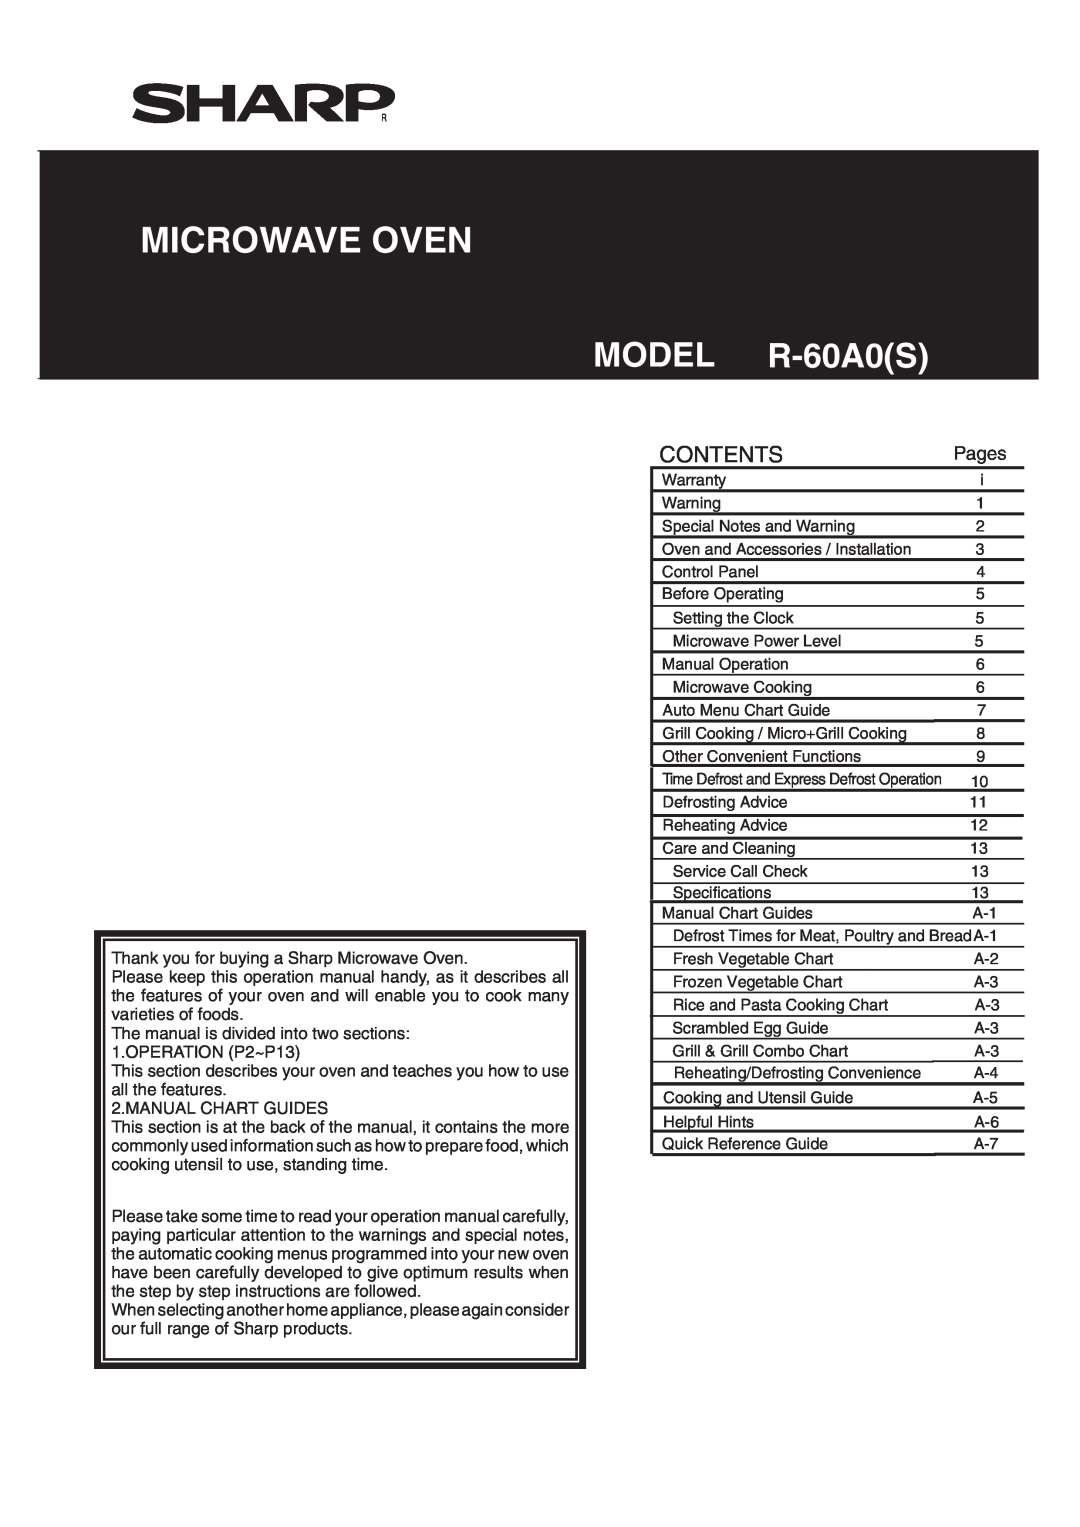 Sharp operation manual Microwave Oven, MODEL R-60A0S, OPERATION MANUAL and COOKING GUIDE, Contents, Pages 